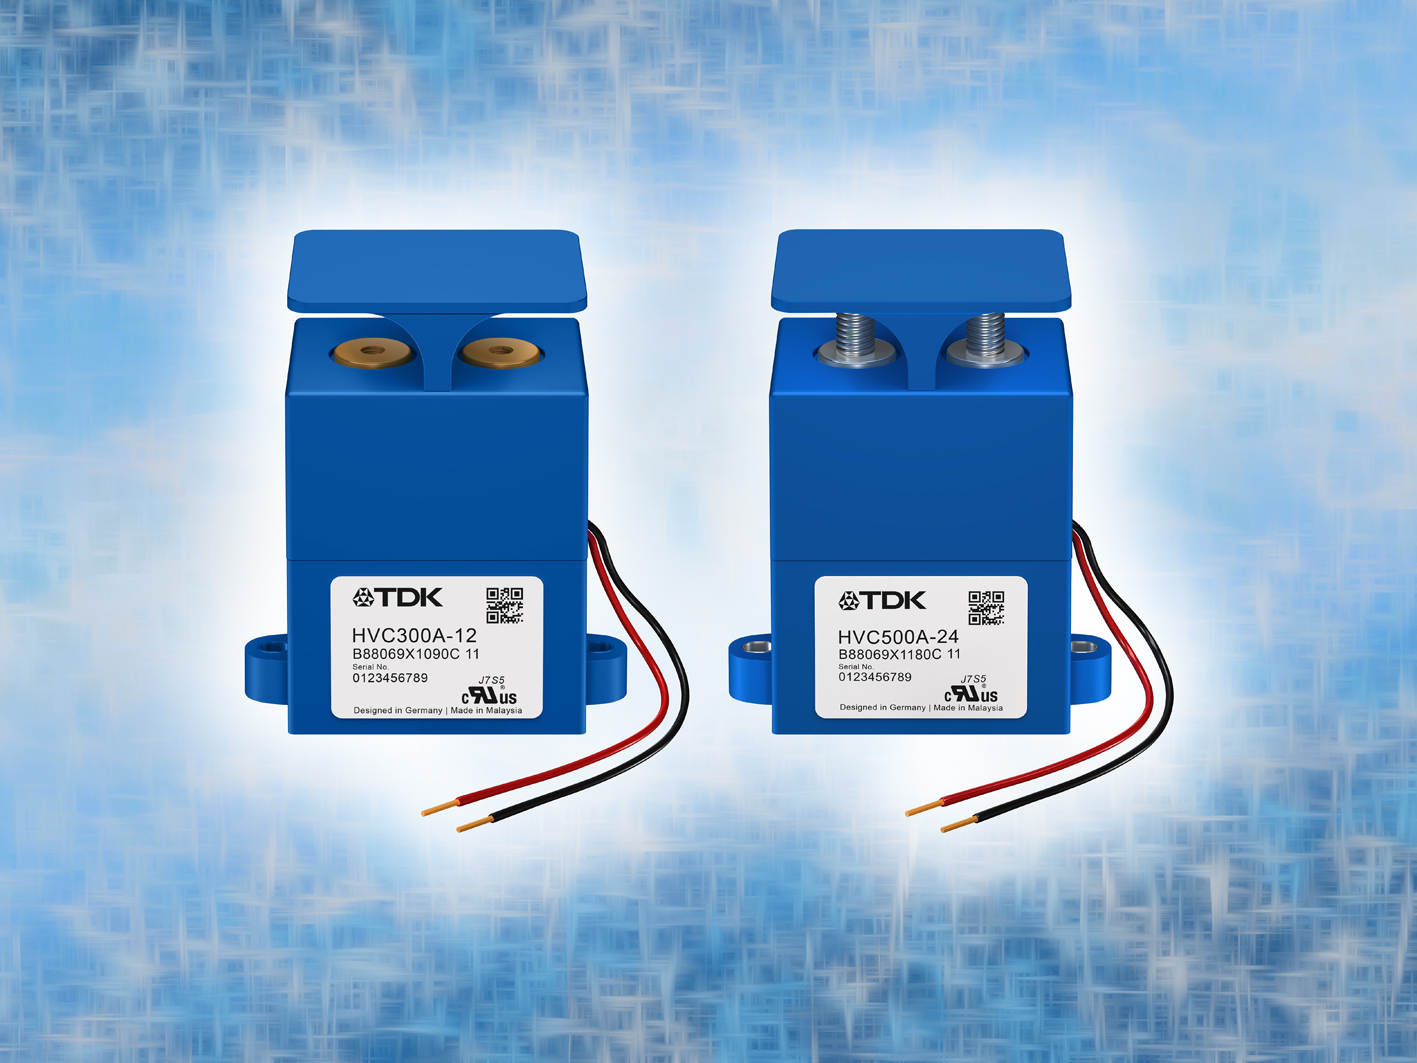 Portfolio of High-Voltage Contactors Extended for High Current Capabilities up to 500 A